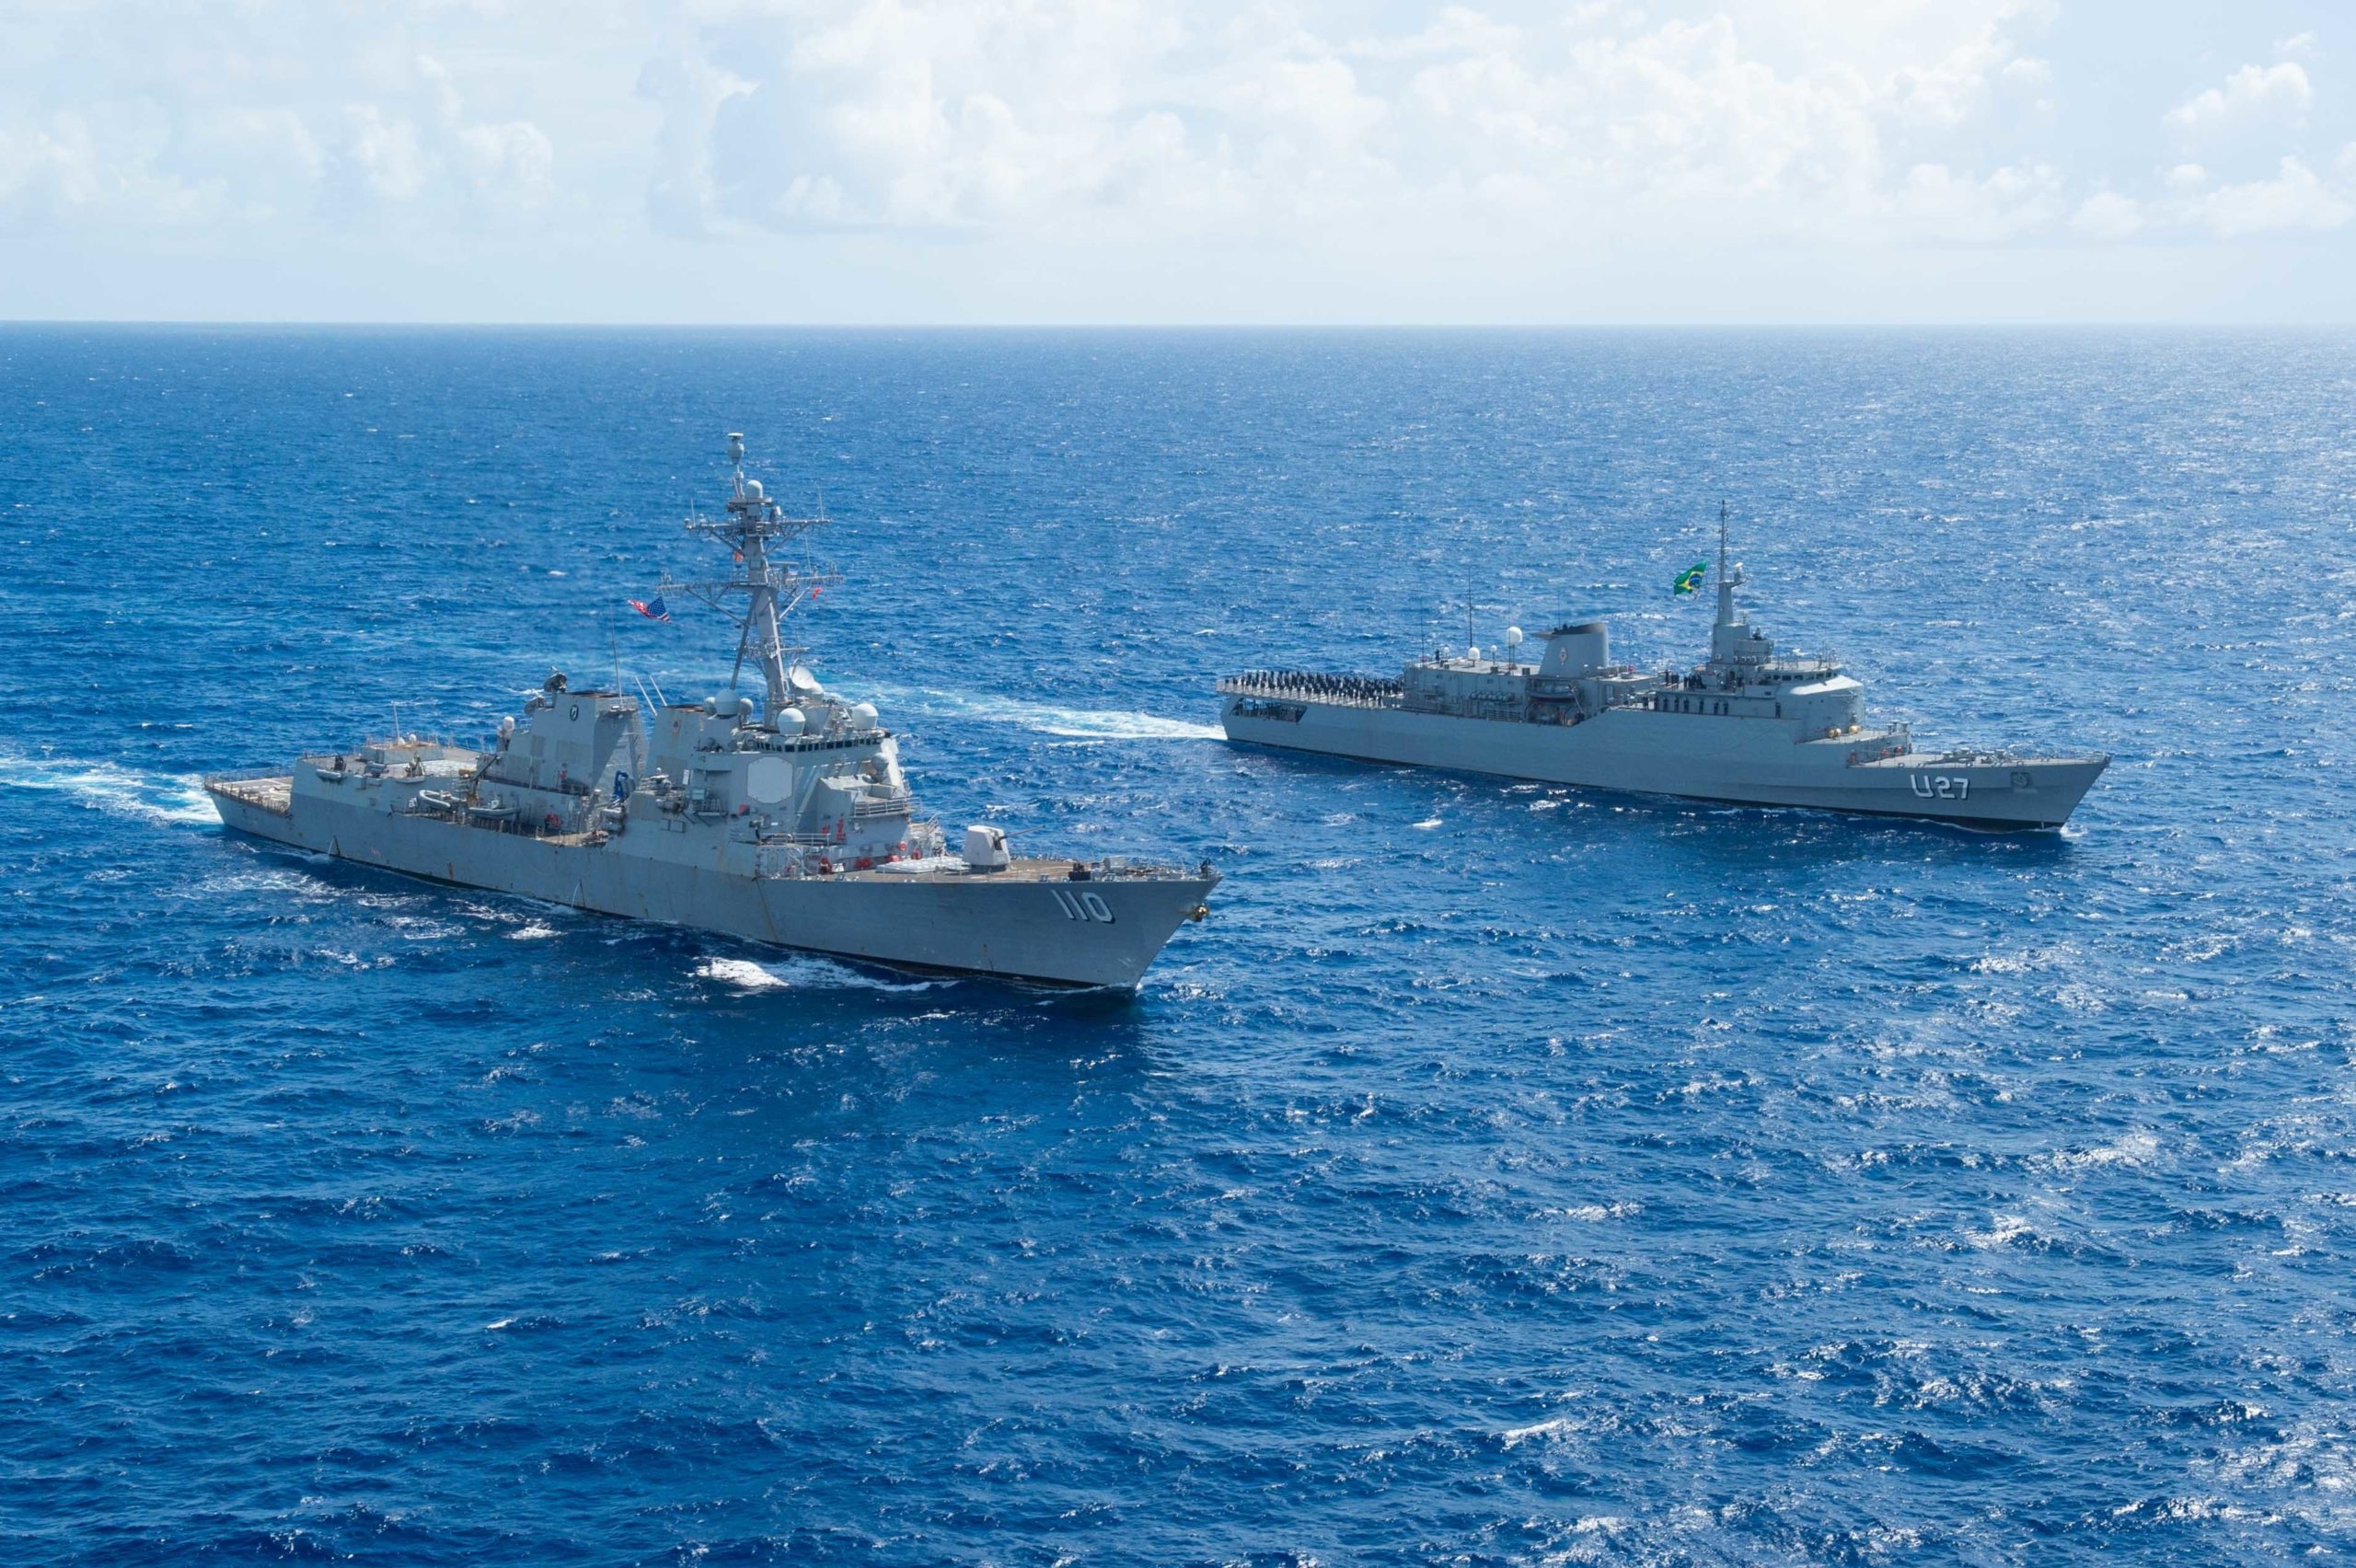 Brazilian Navy Conducts PASSEX Exercise and Other Activities with the US Navy